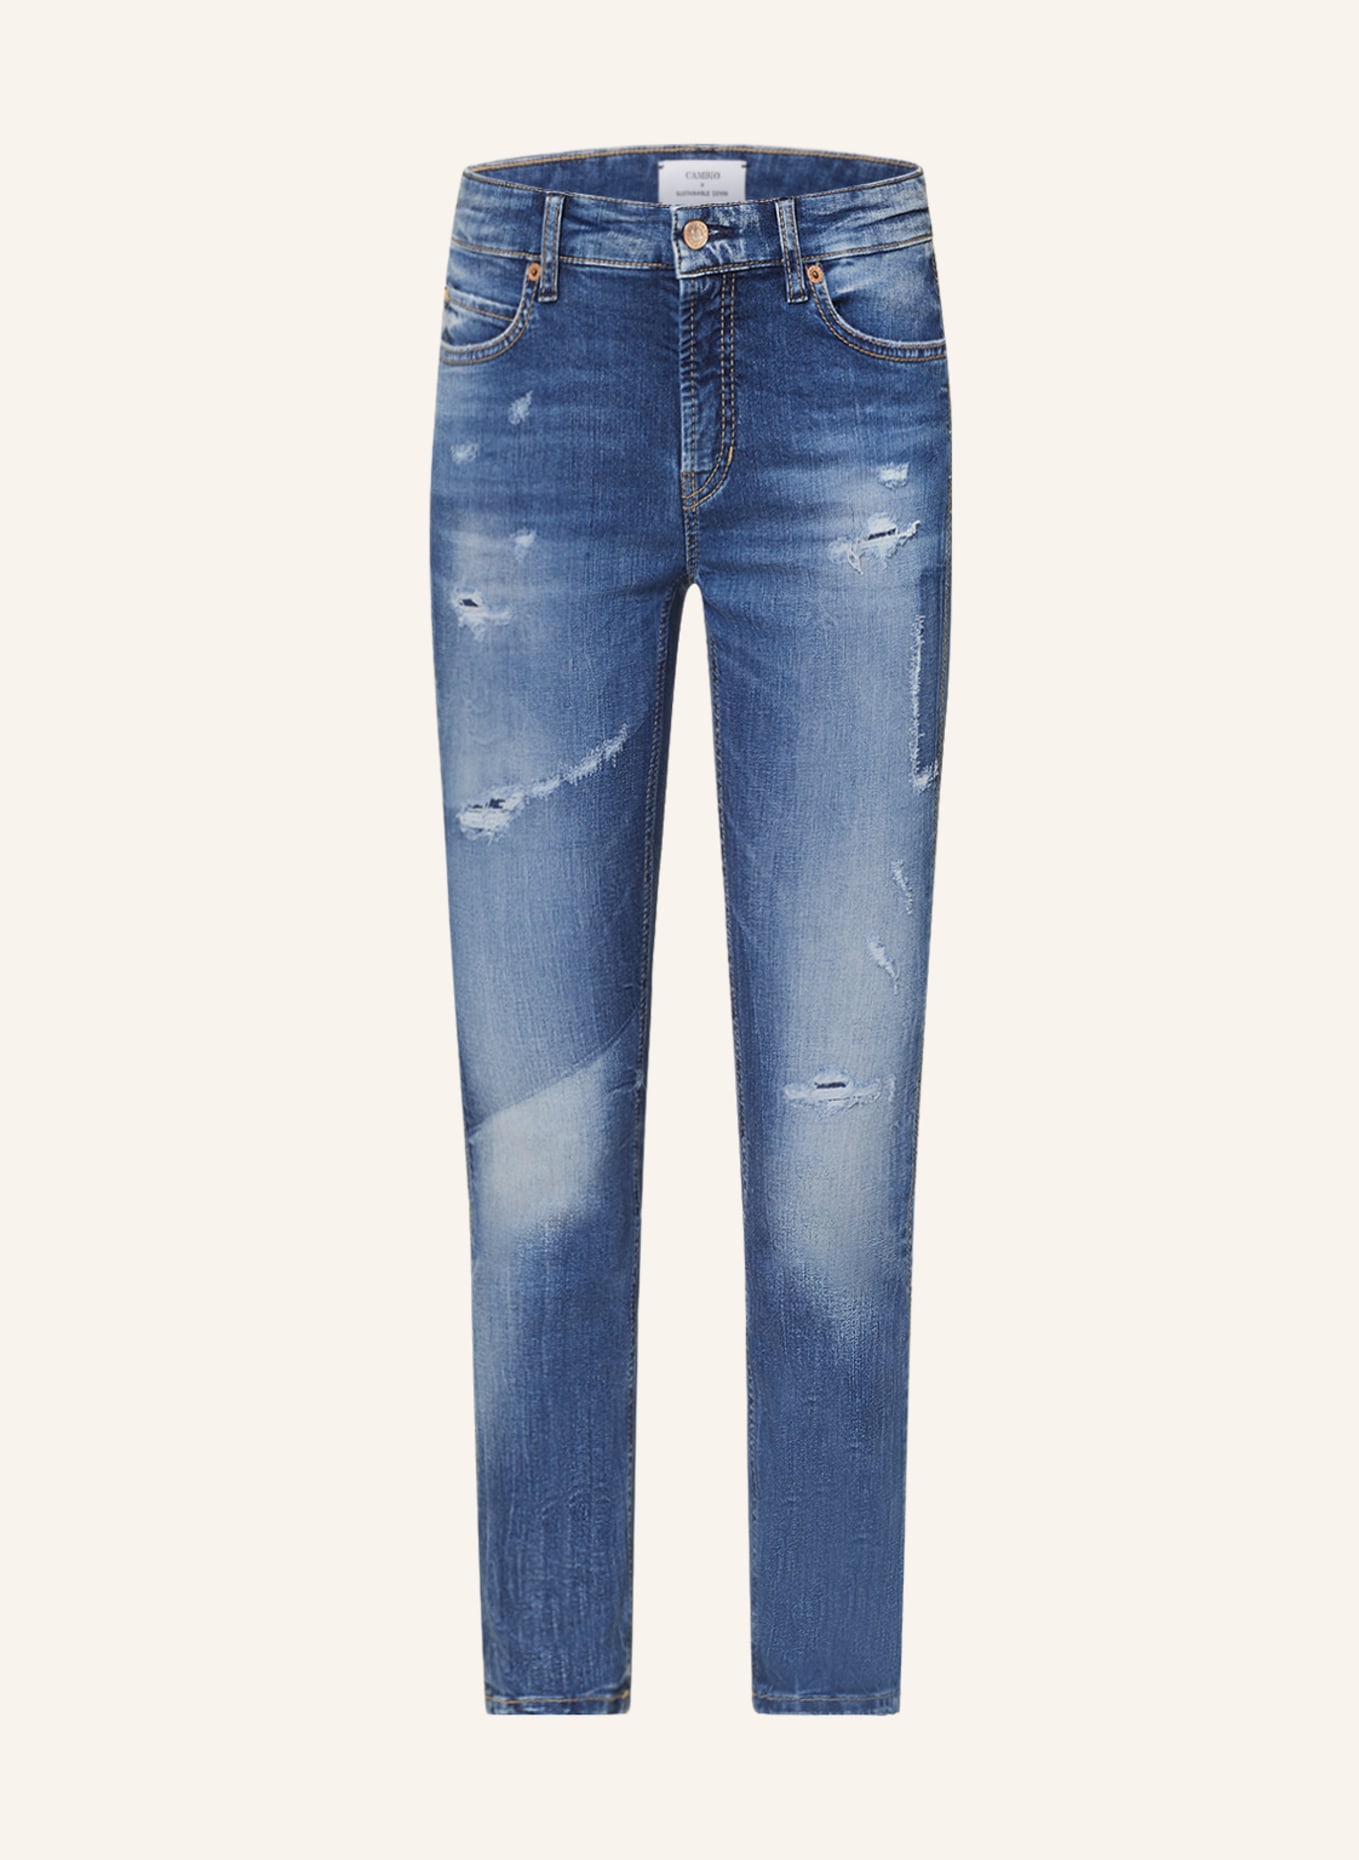 CAMBIO Skinny Jeans PARIS, Color: 5192 eco heavy used & repaired (Image 1)